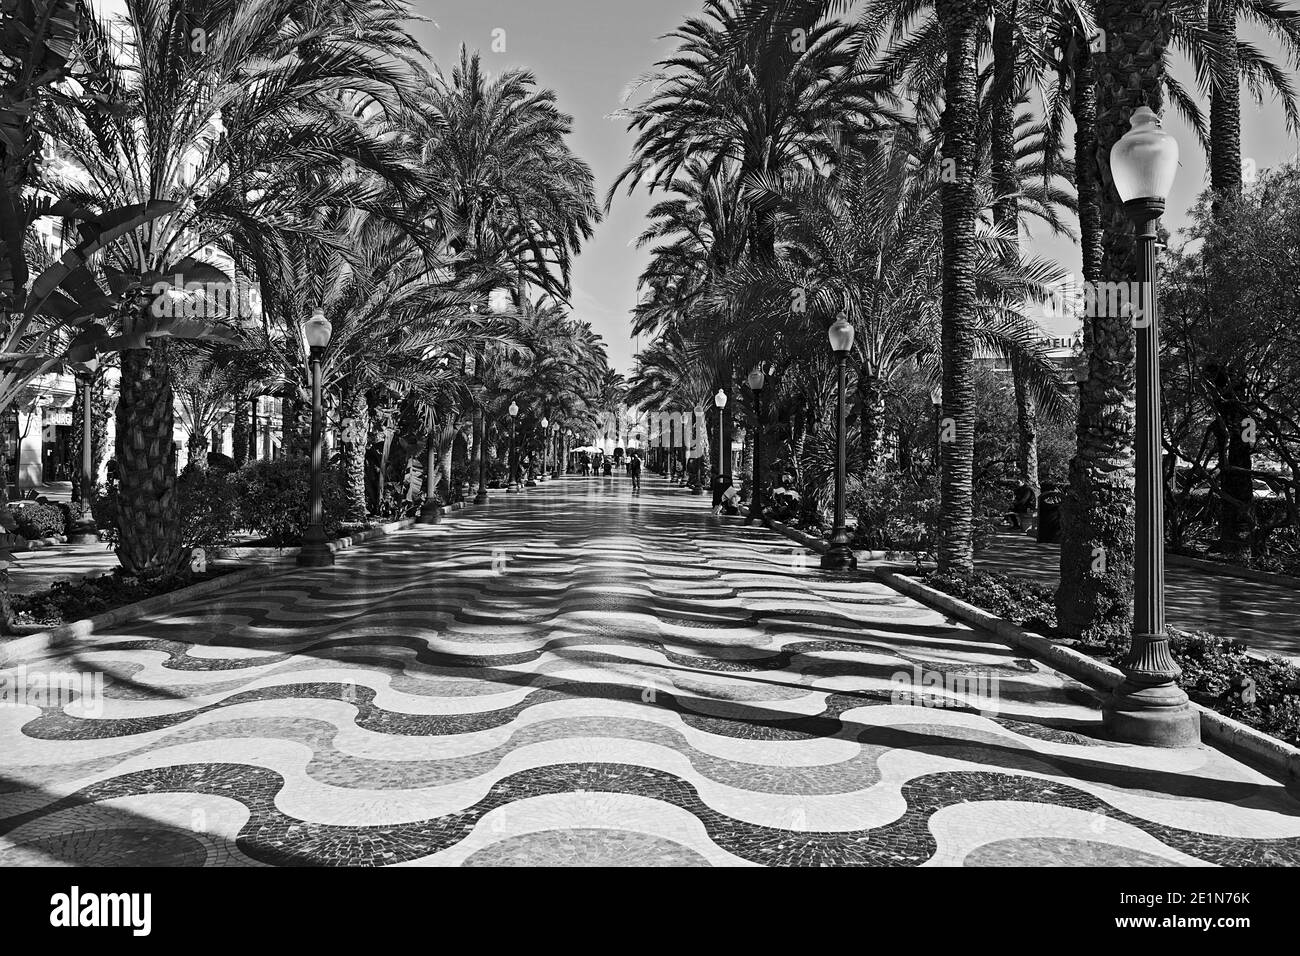 3D effect of wavy tiled paving along the Palm lined Esplanade de Espana in Alicante, Spain Stock Photo